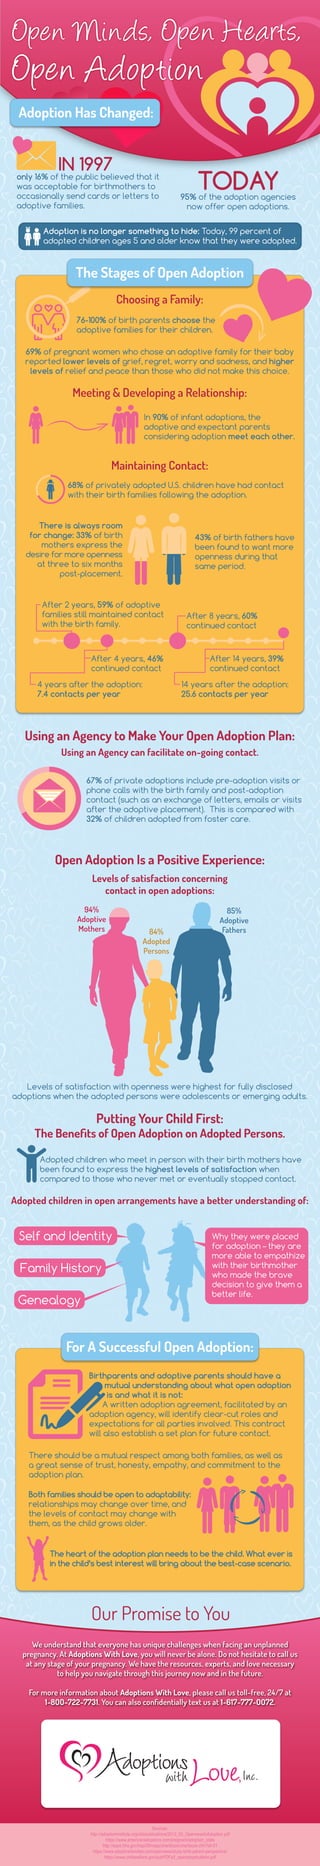 only 16% of the public believed that it
was acceptable for birthmothers to
occasionally send cards or letters to
adoptive families.
76-100% of birth parents choose the
adoptive families for their children.
In 90% of infant adoptions, the
adoptive and expectant parents
considering adoption meet each other.
68% of privately adopted U.S. children have had contact
with their birth families following the adoption.
There is always room
for change: 33% of birth
mothers express the
desire for more openness
at three to six months
post-placement.
43% of birth fathers have
been found to want more
openness during that
same period.
After 2 years, 59% of adoptive
families still maintained contact
with the birth family.
After 4 years, 46%
continued contact
4 years after the adoption:
7.4 contacts per year
14 years after the adoption:
25.6 contacts per year
After 14 years, 39%
continued contact
Adopted children who meet in person with their birth mothers have
been found to express the highest levels of satisfaction when
compared to those who never met or eventually stopped contact.
67% of private adoptions include pre-adoption visits or
phone calls with the birth family and post-adoption
contact (such as an exchange of letters, emails or visits
after the adoptive placement). This is compared with
32% of children adopted from foster care.
After 8 years, 60%
continued contact
Self and Identity
Genealogy
Family History
Choosing a Family:
Meeting & Developing a Relationship:
Maintaining Contact:
Open Minds, Open Hearts,
Open Adoption
Adoption Has Changed:
TODAY
IN 1997
95% of the adoption agencies
now offer open adoptions.
Adoption is no longer something to hide: Today, 99 percent of
adopted children ages 5 and older know that they were adopted.
The Stages of Open Adoption
For A Successful Open Adoption:
Open Adoption Is a Positive Experience:
Using an Agency to Make Your Open Adoption Plan:
Putting Your Child First:
The Beneﬁts of Open Adoption on Adopted Persons.
Adopted children in open arrangements have a better understanding of:
69% of pregnant women who chose an adoptive family for their baby
reported lower levels of grief, regret, worry and sadness, and higher
levels of relief and peace than those who did not make this choice.
Levels of satisfaction with openness were highest for fully disclosed
adoptions when the adopted persons were adolescents or emerging adults.
Levels of satisfaction concerning
contact in open adoptions:
Using an Agency can facilitate on-going contact.
84%
Adopted
Persons
94%
Adoptive
Mothers
85%
Adoptive
Fathers
Why they were placed
for adoption – they are
more able to empathize
with their birthmother
who made the brave
decision to give them a
better life.
Birthparents and adoptive parents should have a
mutual understanding about what open adoption
is and what it is not:
A written adoption agreement, facilitated by an
adoption agency, will identify clear-cut roles and
expectations for all parties involved. This contract
will also establish a set plan for future contact.
Both families should be open to adaptability:
relationships may change over time, and
the levels of contact may change with
them, as the child grows older.
The heart of the adoption plan needs to be the child. What ever is
in the child’s best interest will bring about the best-case scenario.
There should be a mutual respect among both families, as well as
a great sense of trust, honesty, empathy, and commitment to the
adoption plan.
Our Promise to You
We understand that everyone has unique challenges when facing an unplanned
pregnancy. At Adoptions With Love, you will never be alone. Do not hesitate to call us
at any stage of your pregnancy. We have the resources, experts, and love necessary
to help you navigate through this journey now and in the future.
For more information about Adoptions With Love, please call us toll-free, 24/7 at
1-8OO-722-7731. You can also conﬁdentially text us at 1-617-777-OO72.
Sources:
http://adoptioninstitute.org/old/publications/2012_03_OpennessInAdoption.pdf
https://www.americanadoptions.com/pregnant/adoption_stats
http://aspe.hhs.gov/hsp/09/nsap/chartbook/chartbook.cfm?id=31
https://www.adoptivefamilies.com/openness/study-birth-parent-perspective/
https://www.childwelfare.gov/pubPDFs/f_openadoptbulletin.pdf
 